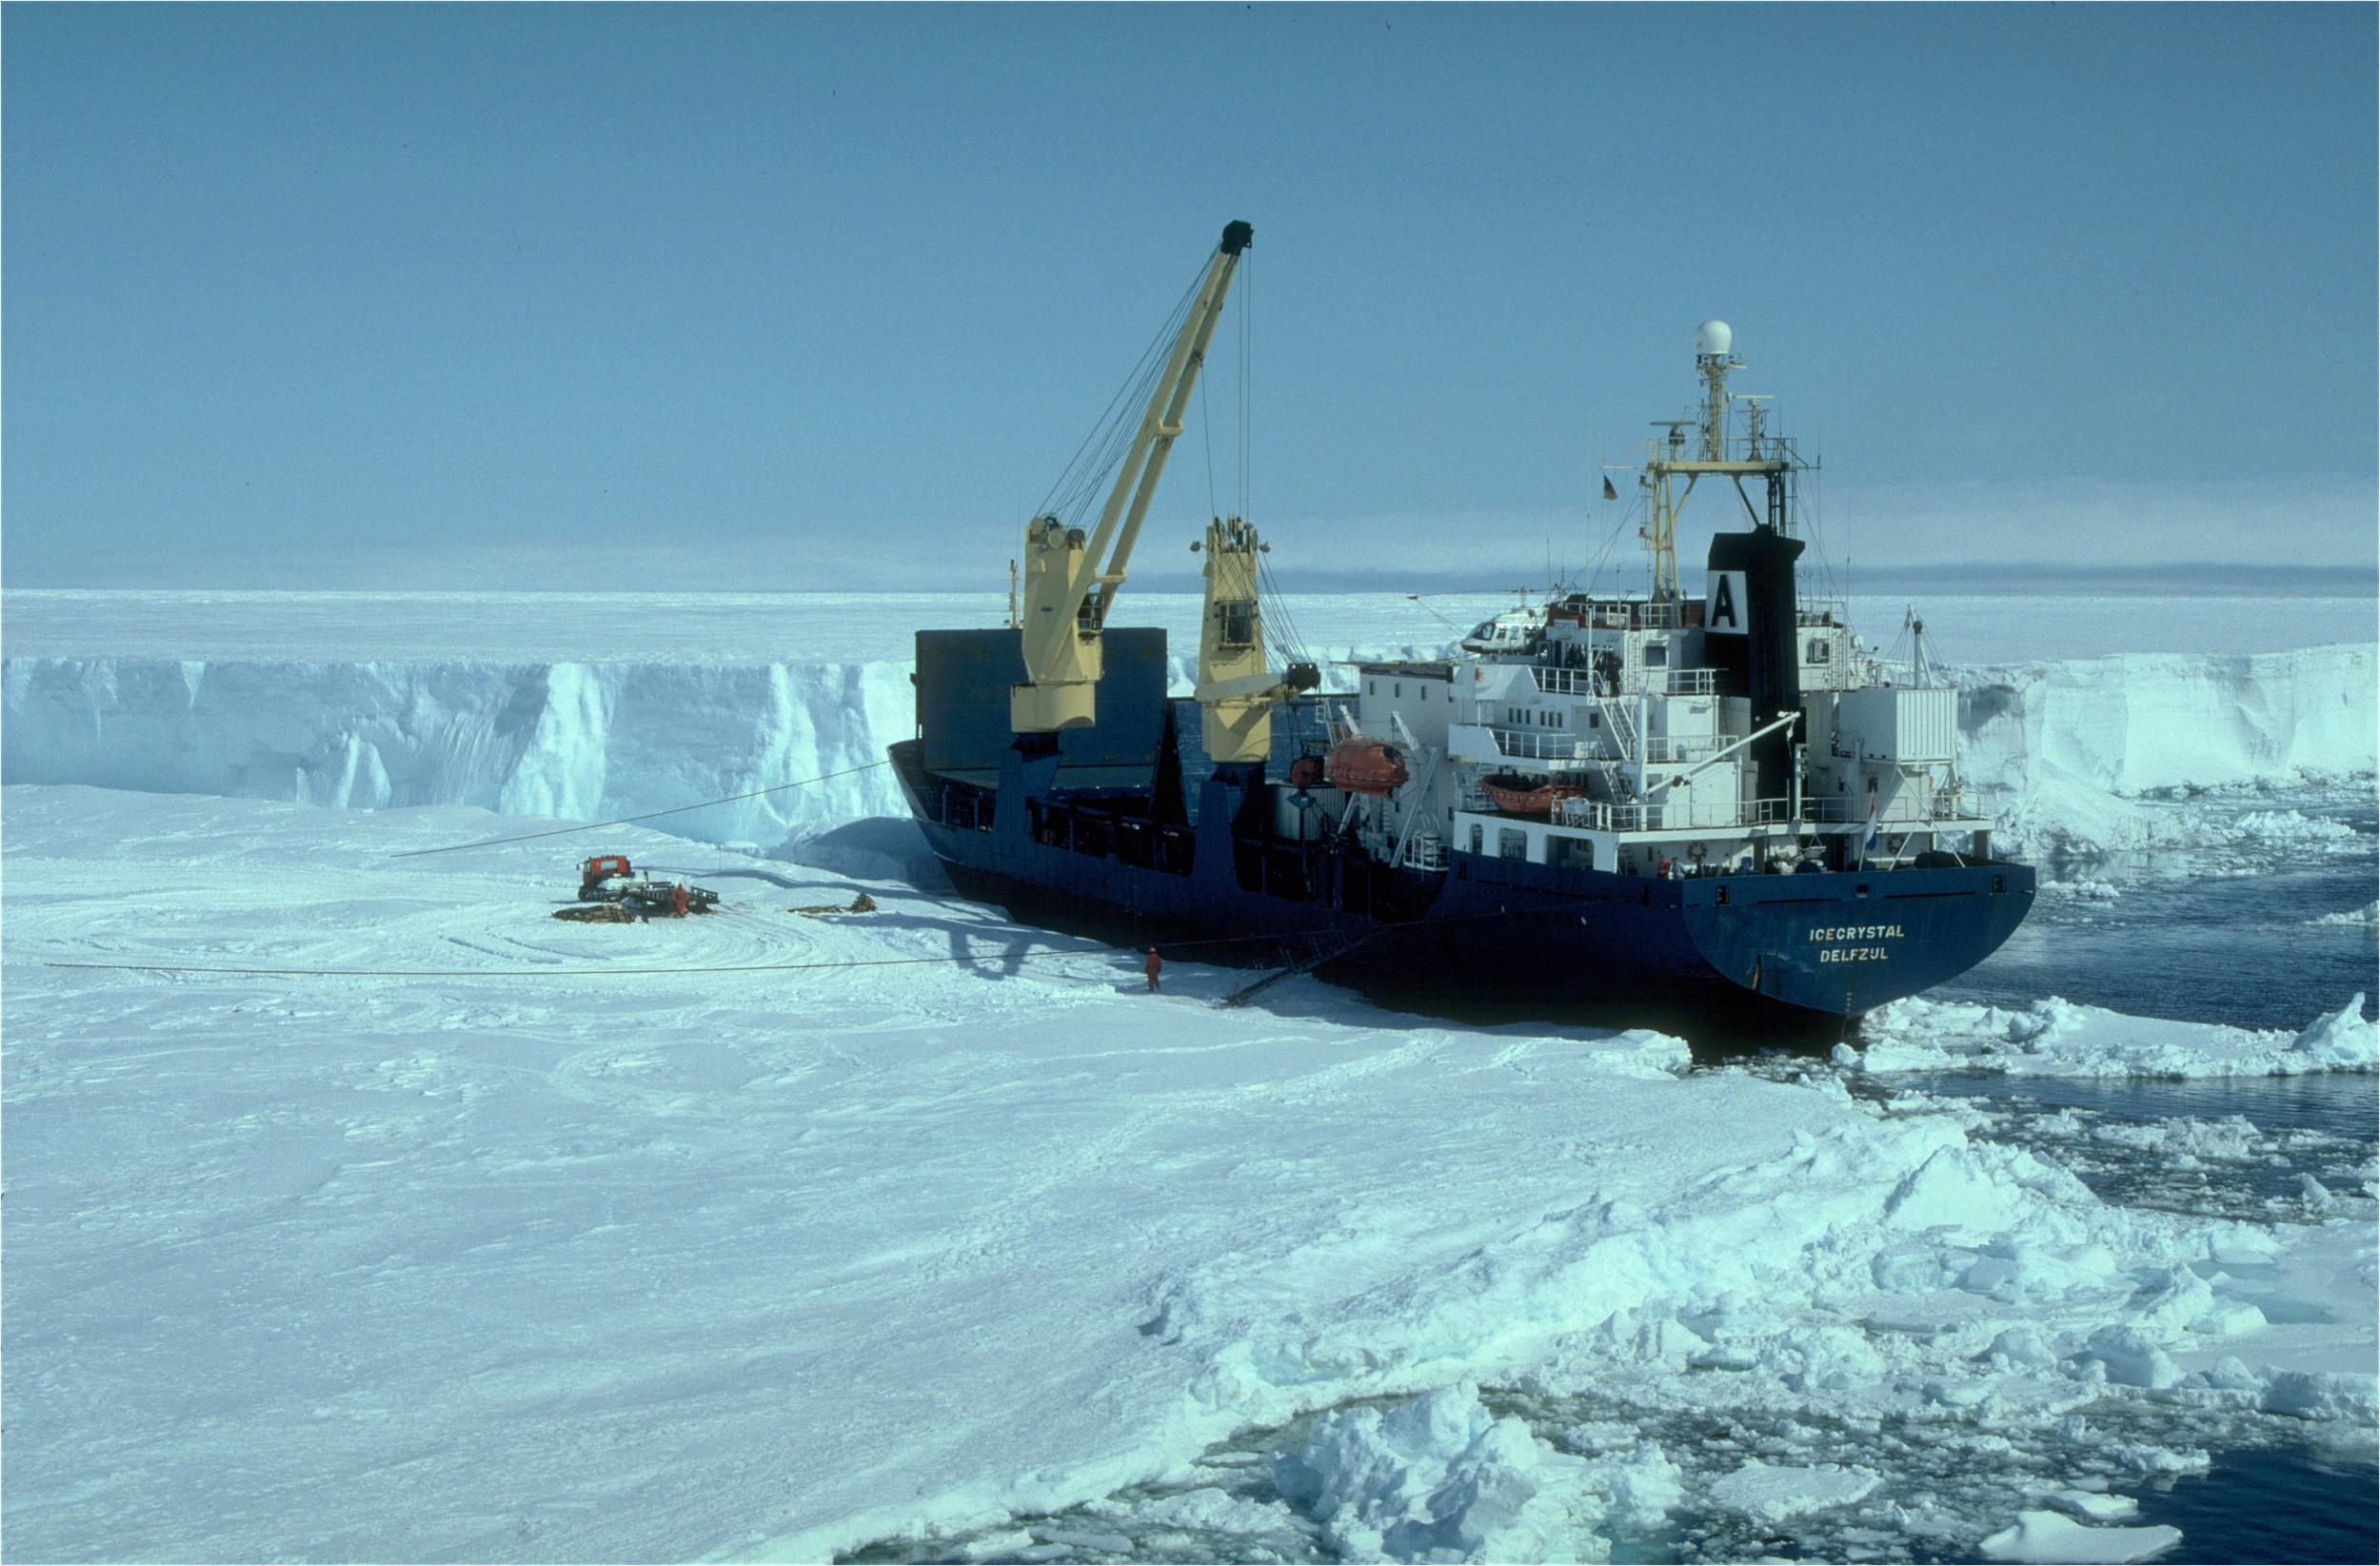 Pictured is a German supply ship moored at the edge of an ice shelf in West Antarctica